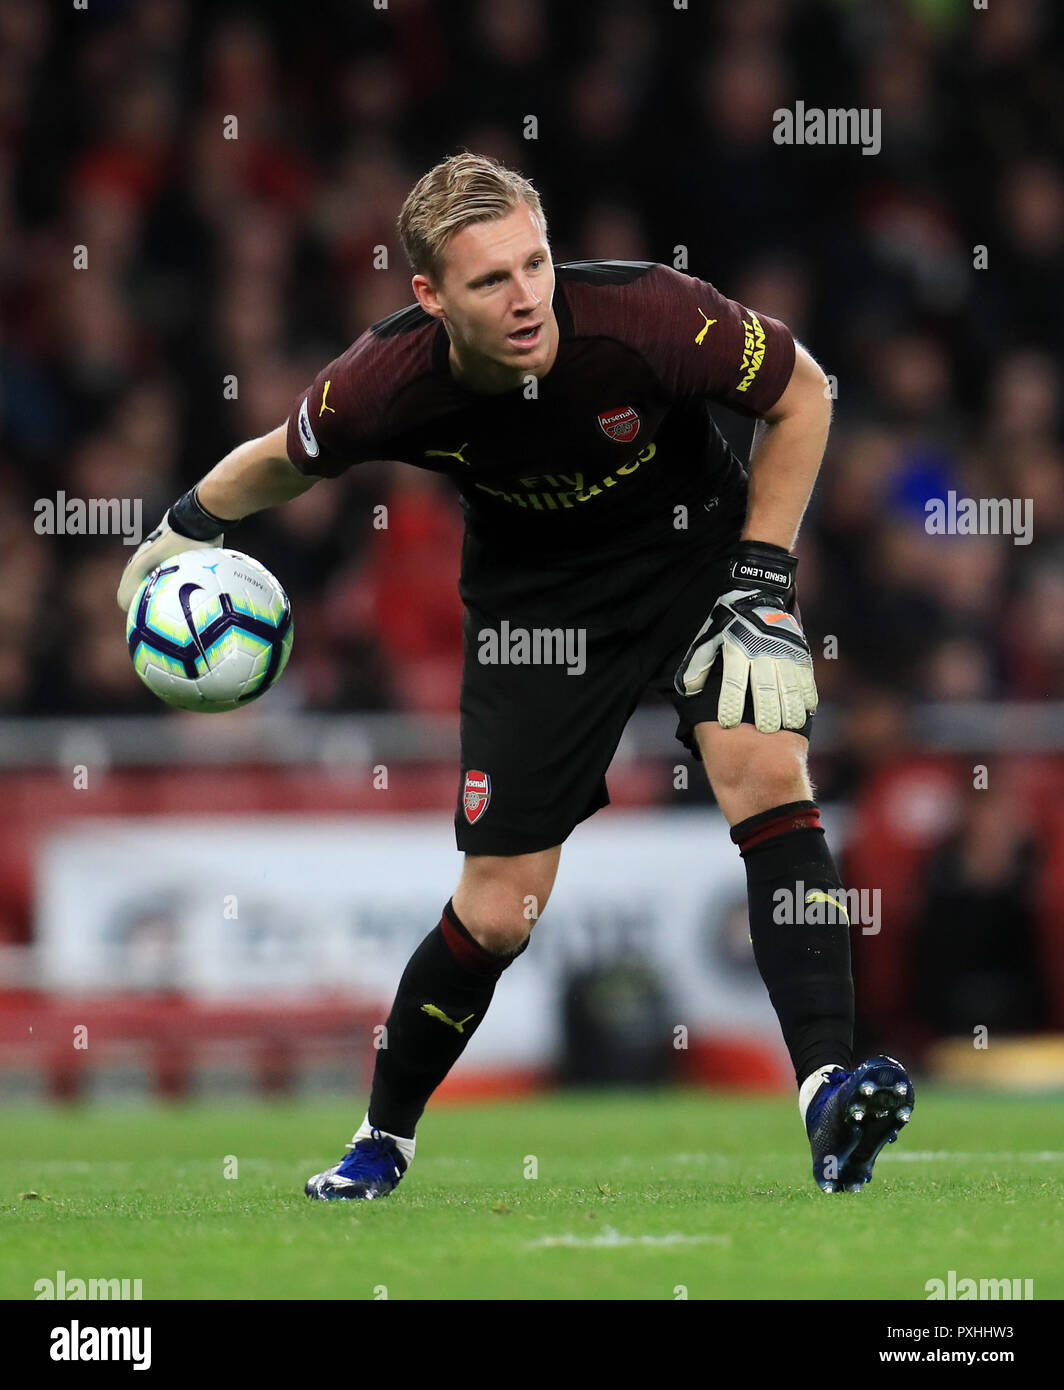 Arsenal goalkeeper Bernd Leno during the Premier League match at the  Emirates Stadium, London. PRESS ASSOCIATION Photo. Picture date: Monday  October 22, 2018. See PA story SOCCER Arsenal. Photo credit should read: